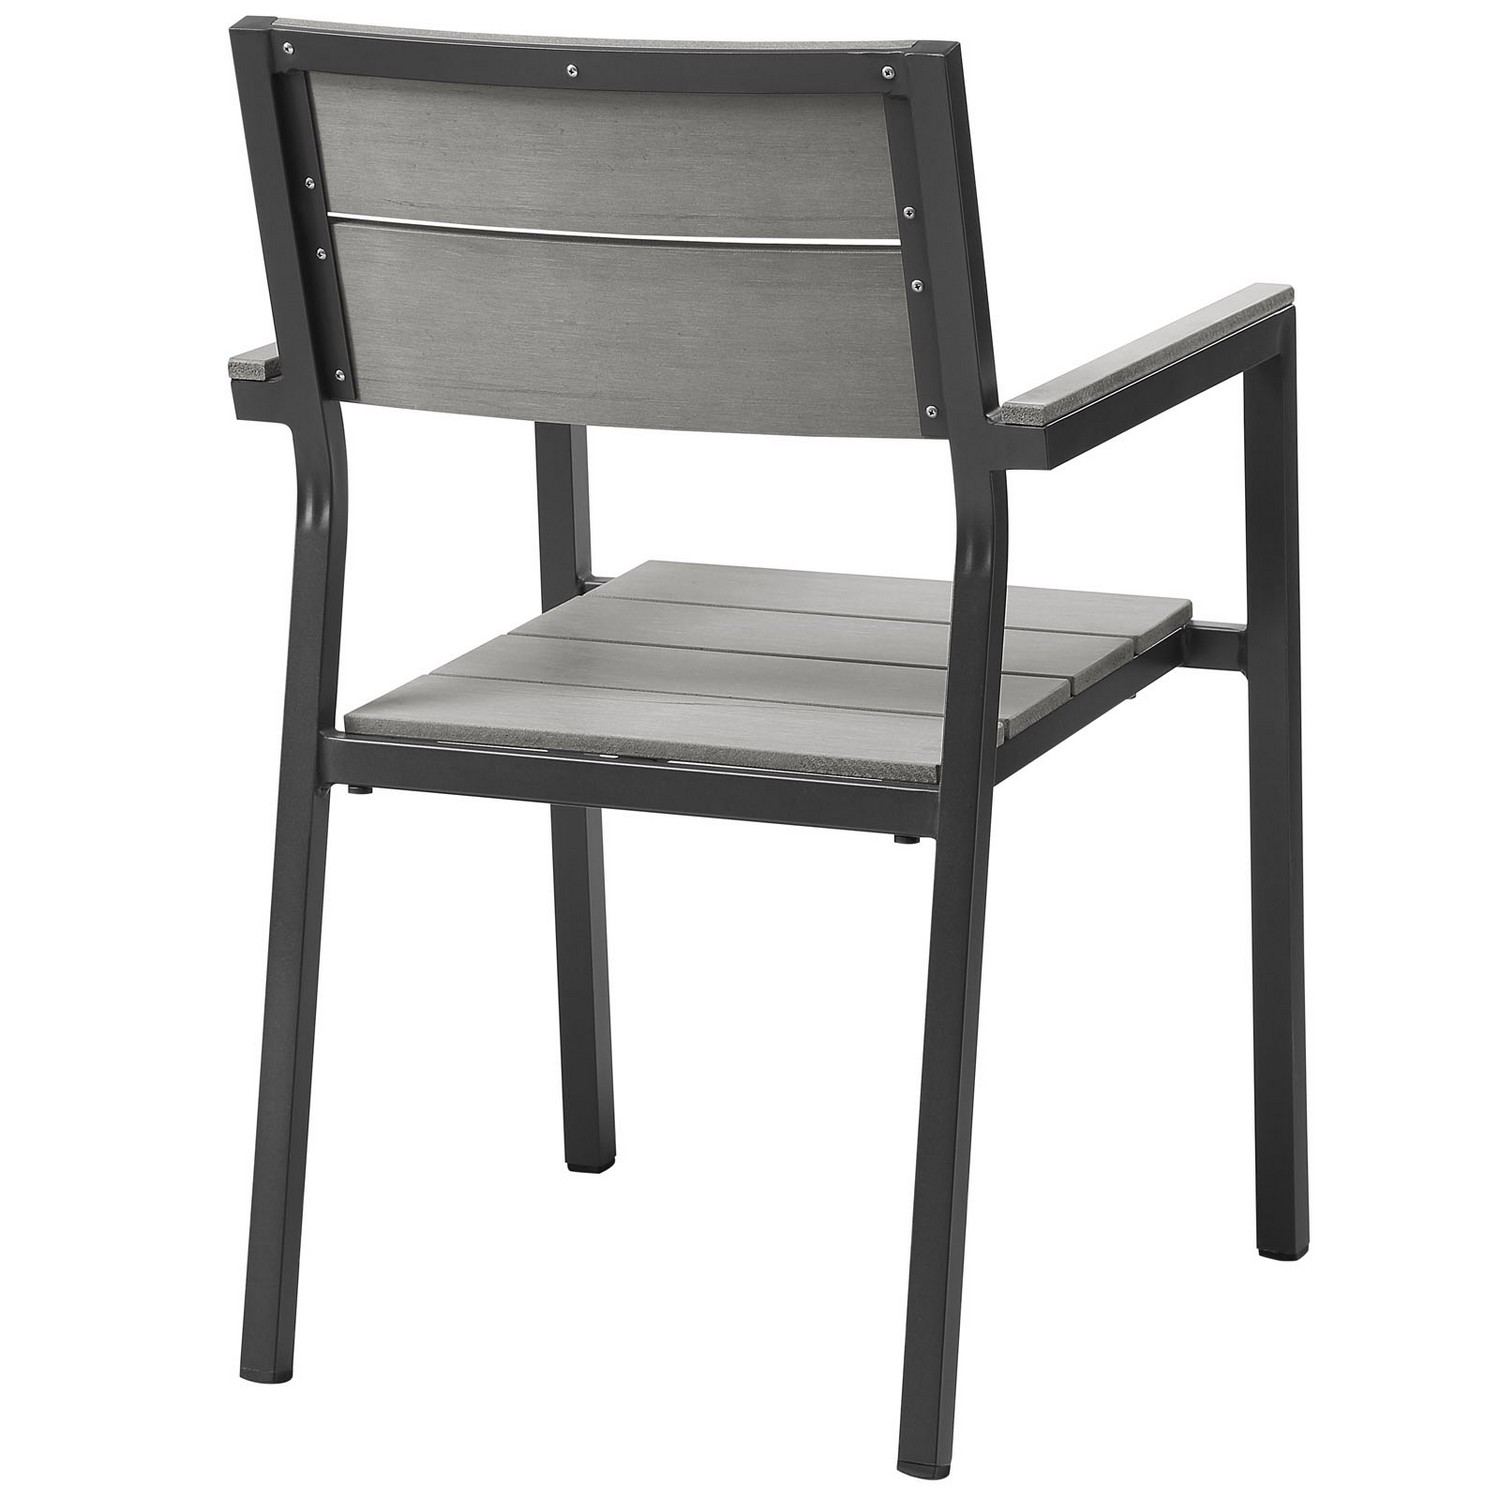 Modway Maine Dining Armchair Outdoor Patio Set of 2 - Brown/Gray